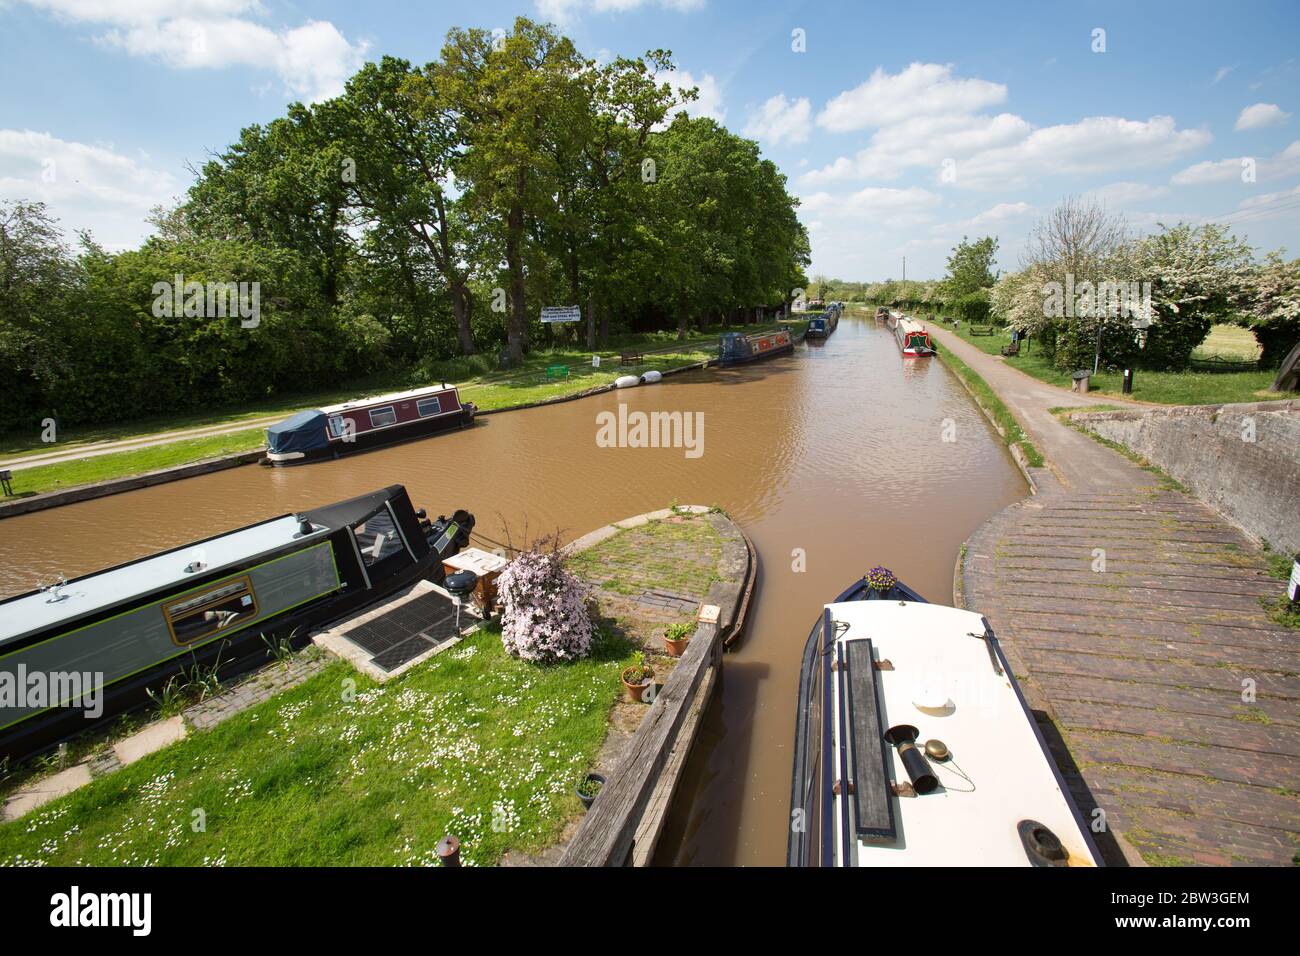 Shropshire Union Canal, Cheshire, England.  Picturesque view of a canal boat transiting the Shropshire Union Canal, at the Nantwich Canal Centre. Stock Photo